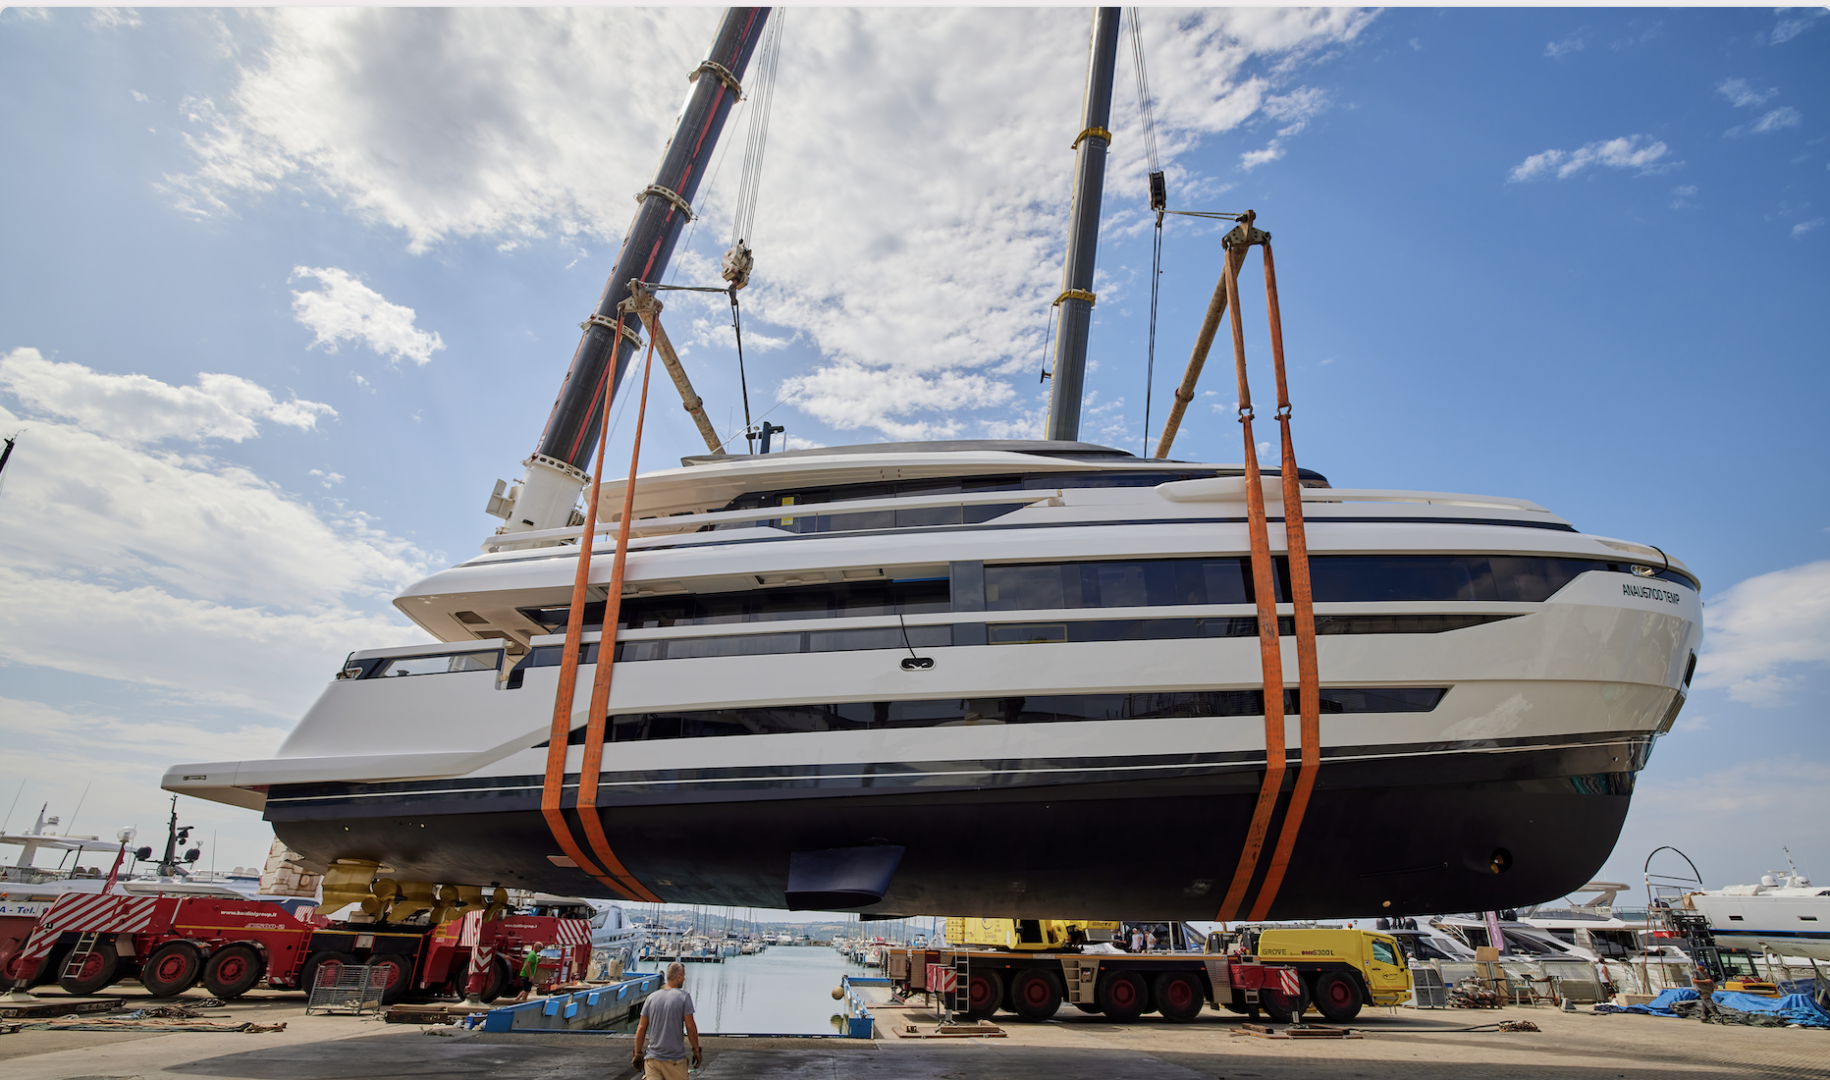 Extra Yachts, a brand of ISA Yachts, has launched the new X96 Triplex